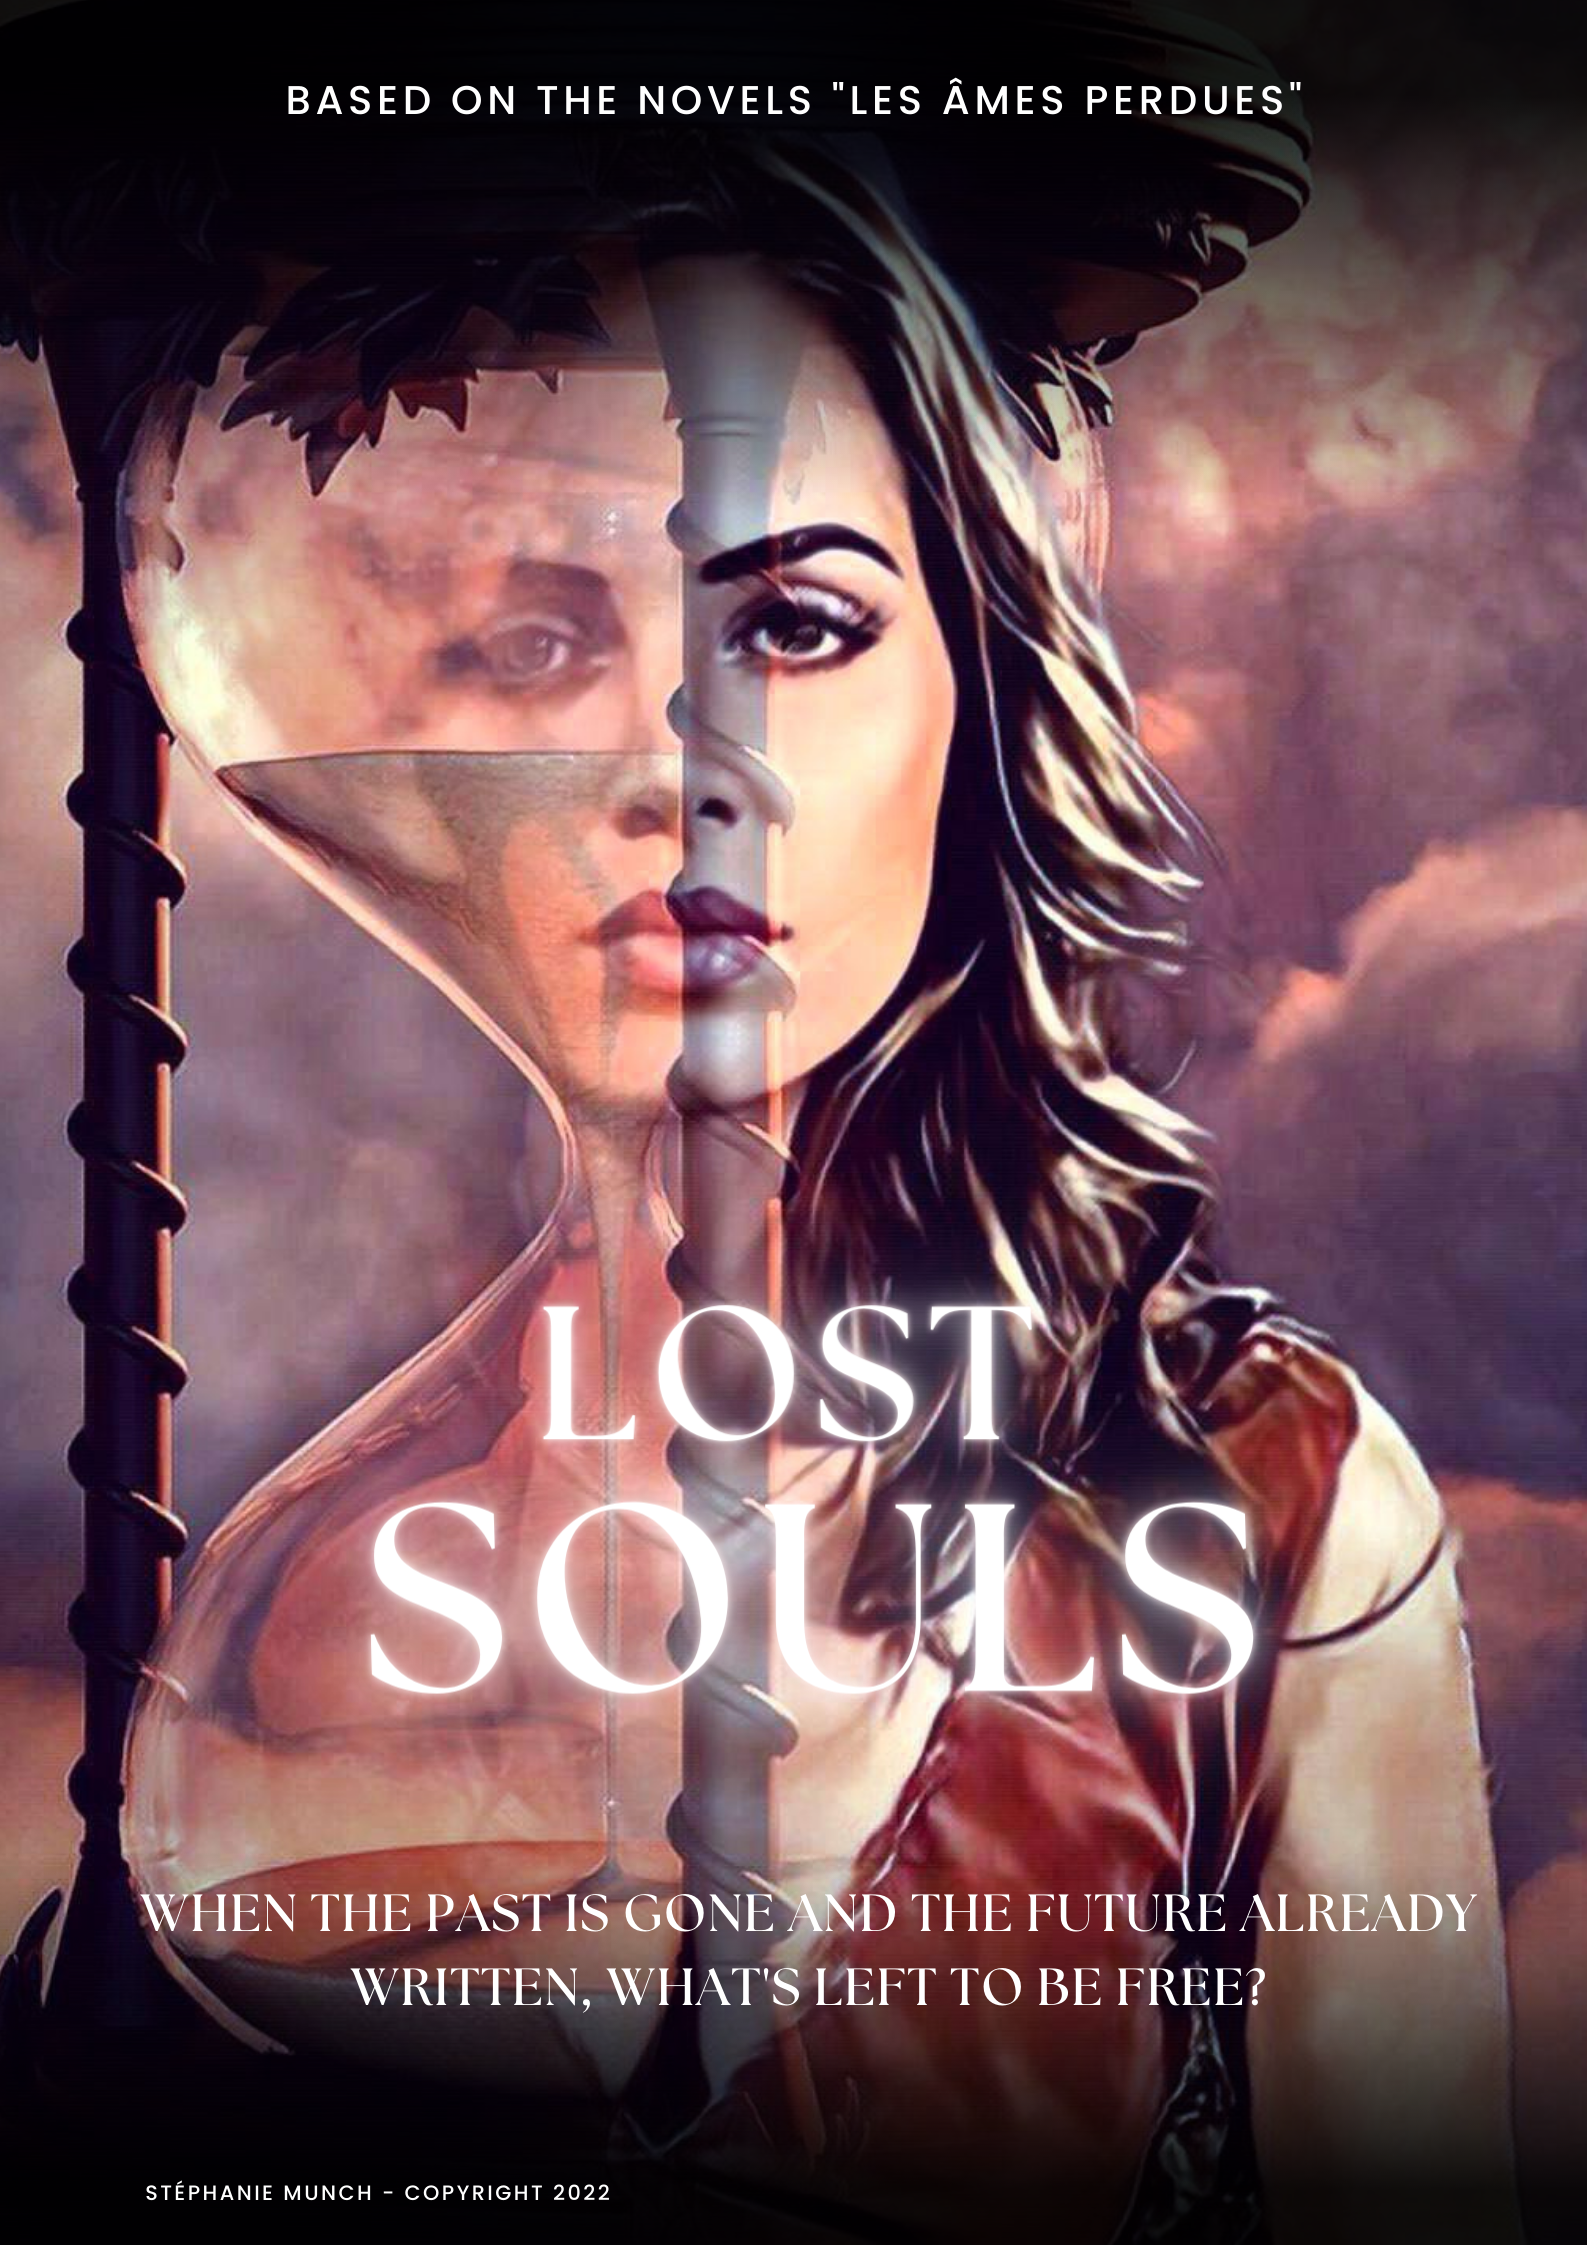 THE LOST SOULS